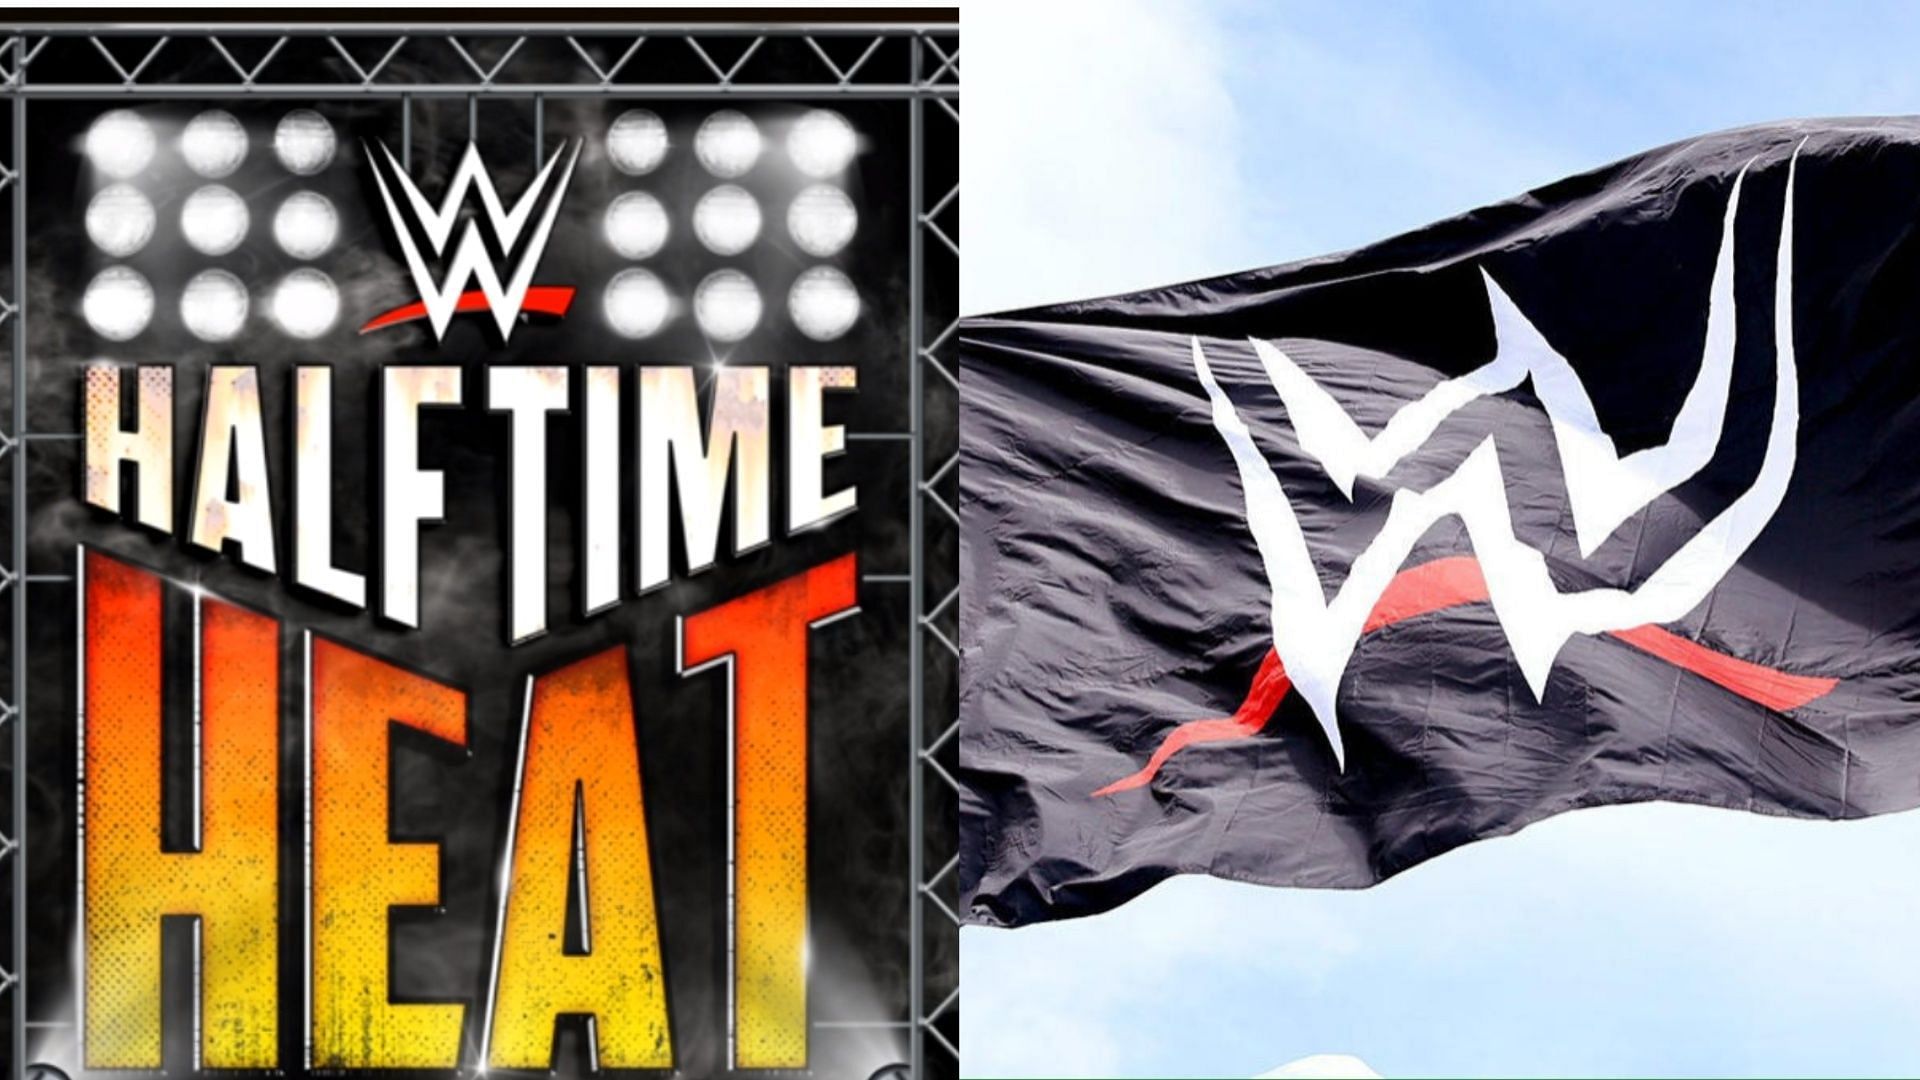 WWE Halftime Heat was an NXT Special Event in 2019.